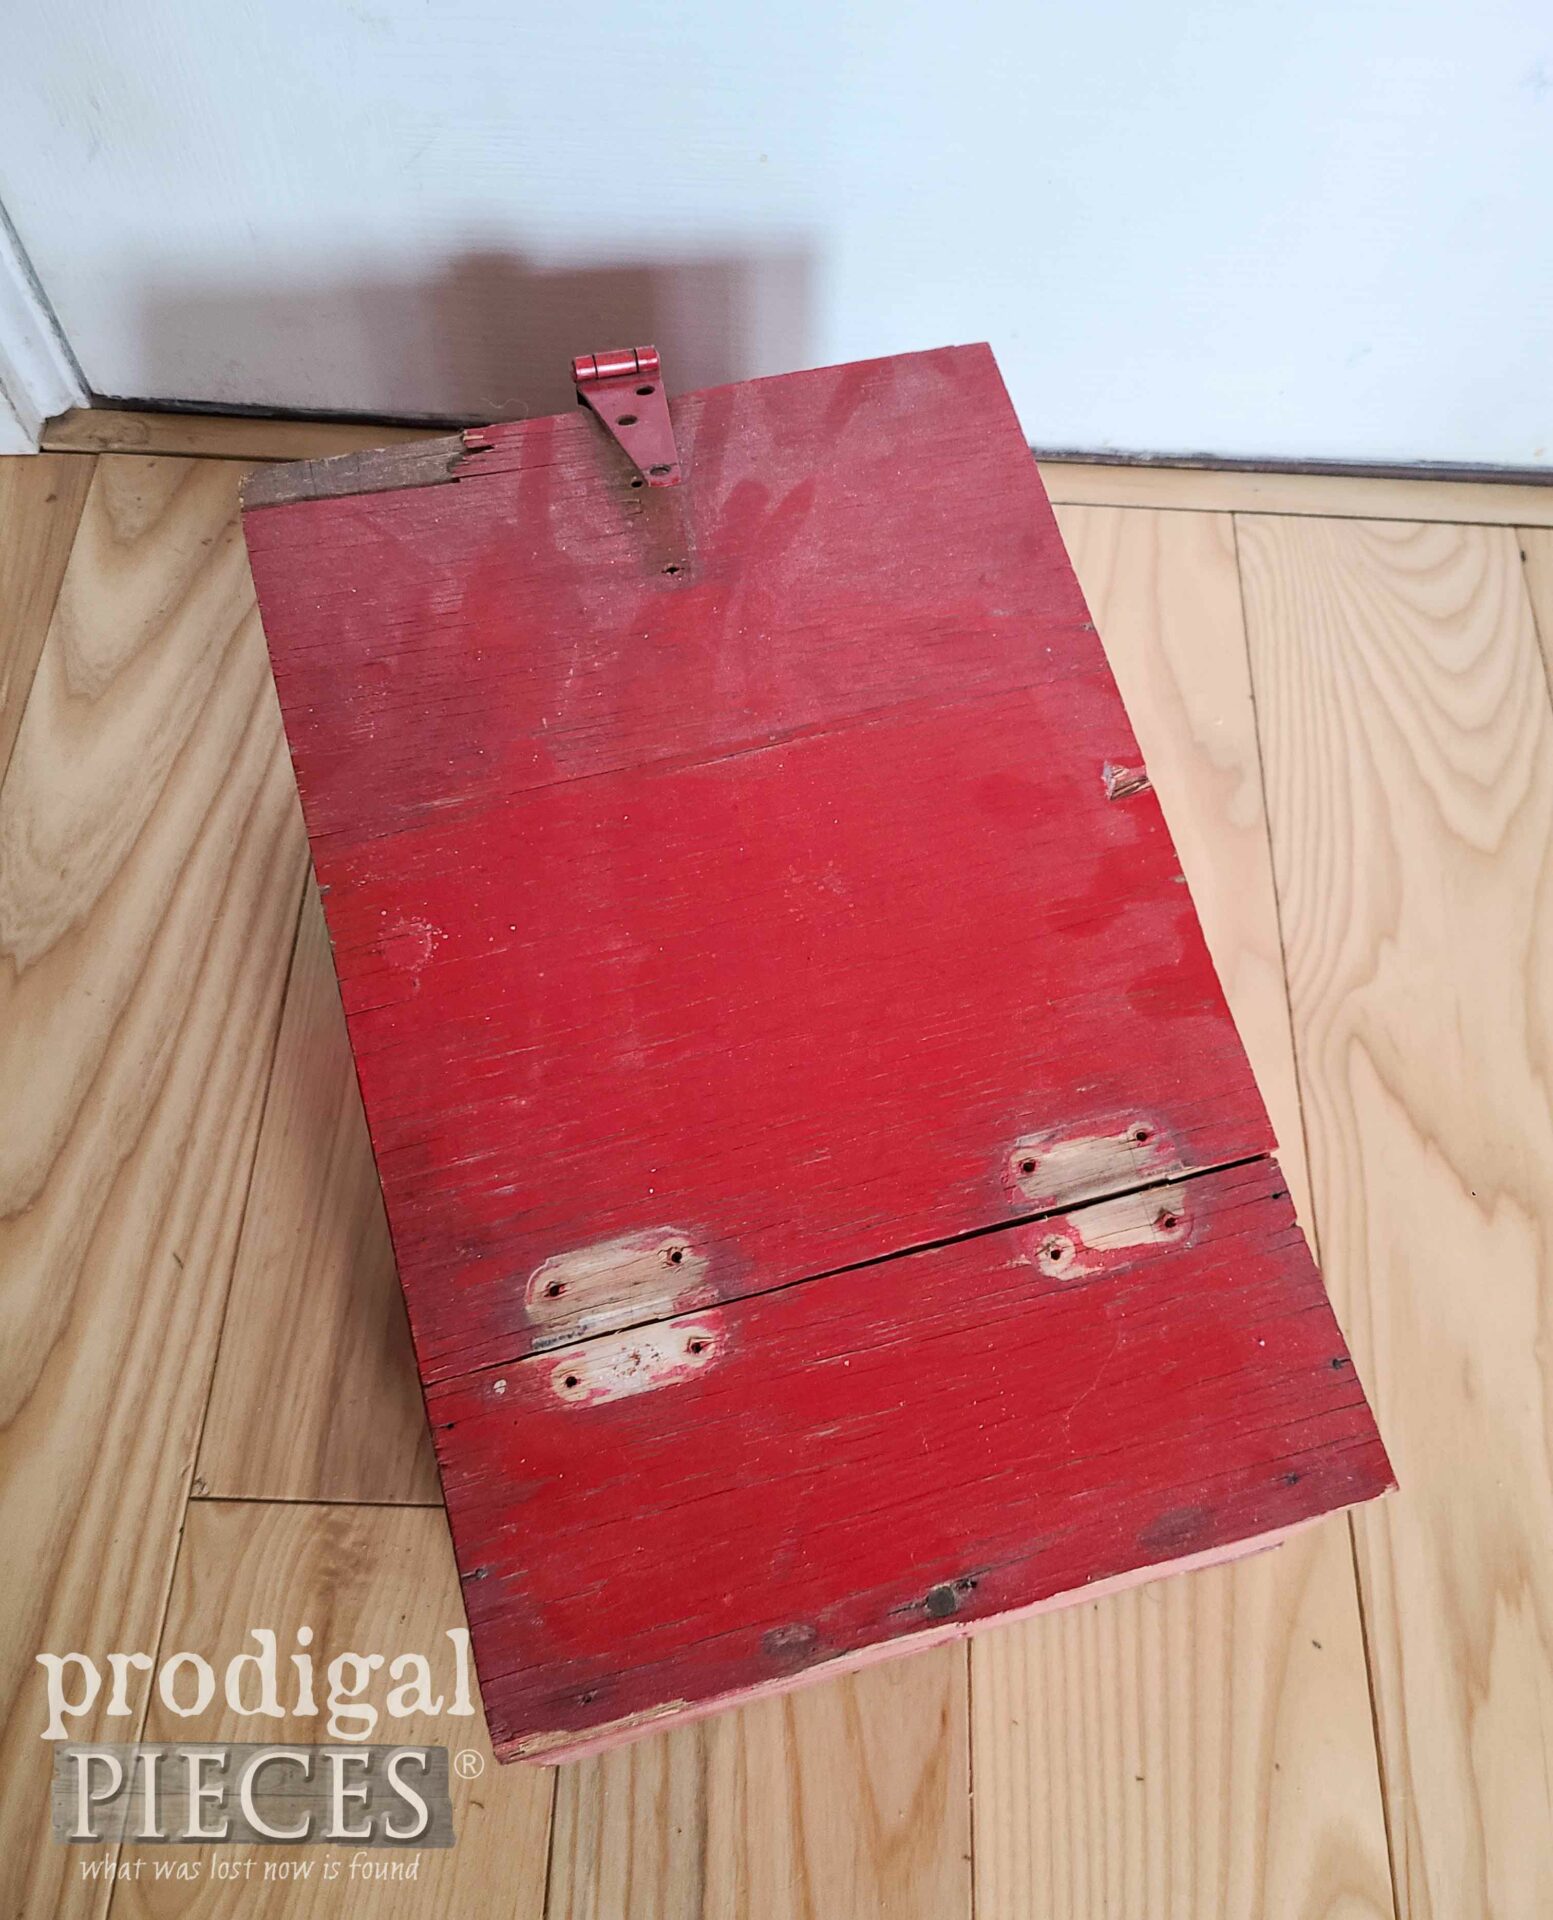 Vintage Red Box Before Upcycle | prodigalpieces.com #prodigalpieces